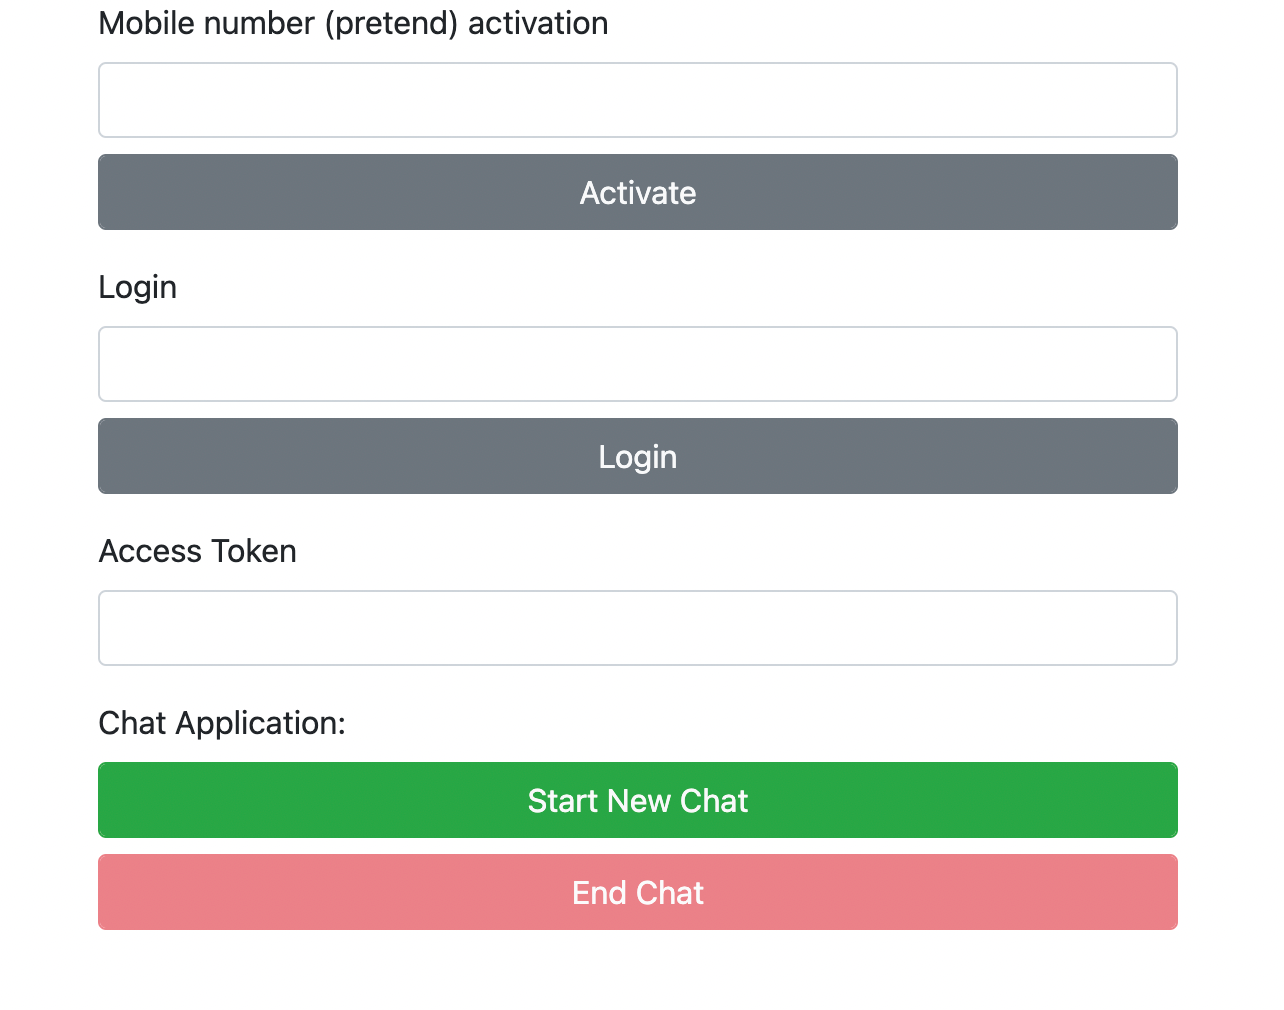 Three text boxes. The first is labeled “Mobile number (pretend) activation”, and an “Activate” button follow. The next is labeled “login” with a “Login” button following. The next is labeled “Access Token, with no button following immediately. There is then a label reading “Chat Application:”, followed by two buttons reading “Start New Chat” and “End Chat”, in order from top to bottom.